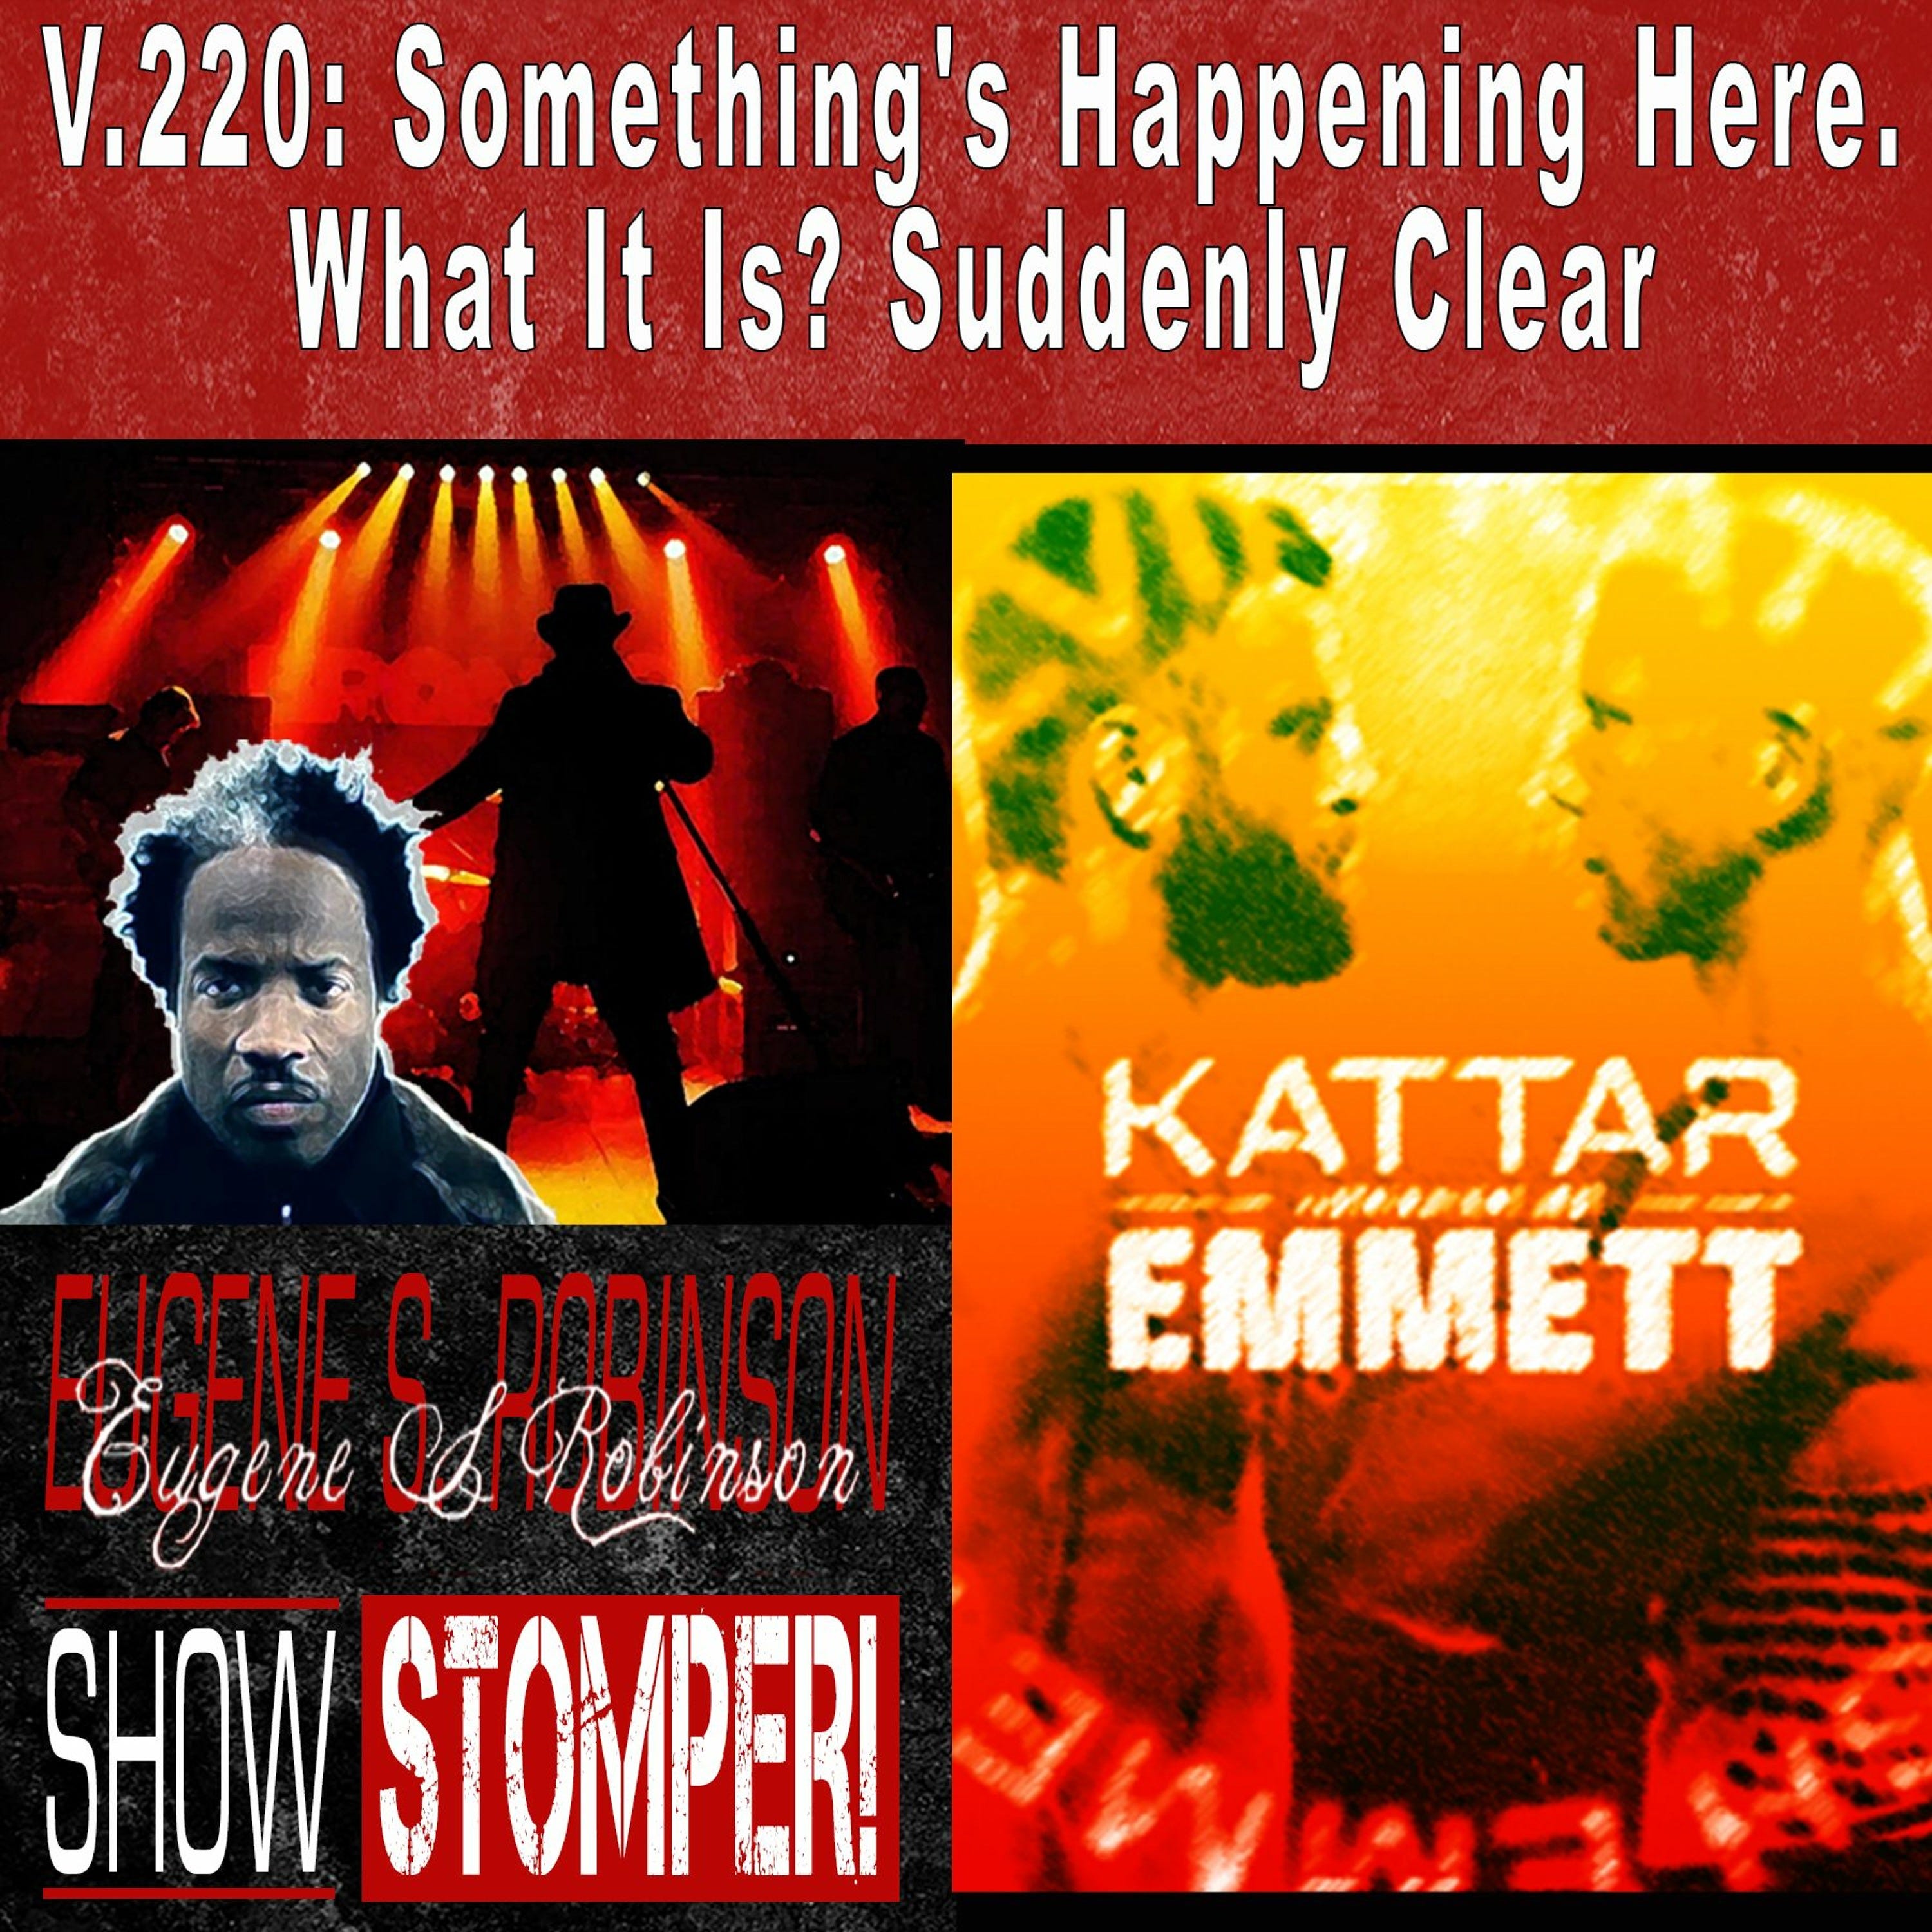 V.220: Something's Happening Here. What It Is? Suddenly Clear On The Eugene S. Robinson Show Stomper